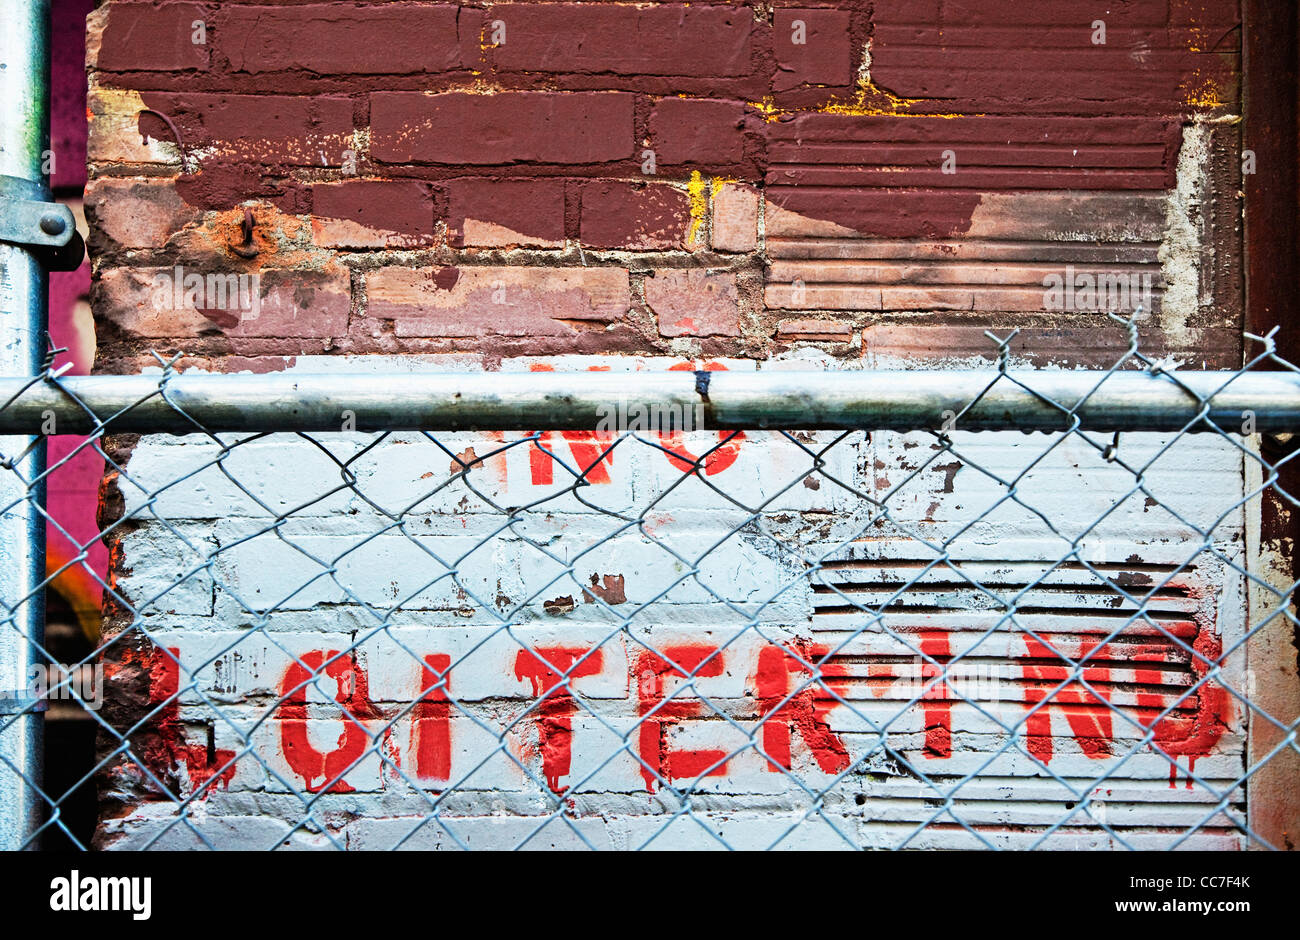 no loitering sign painted in wall behind chain link fence Stock Photo